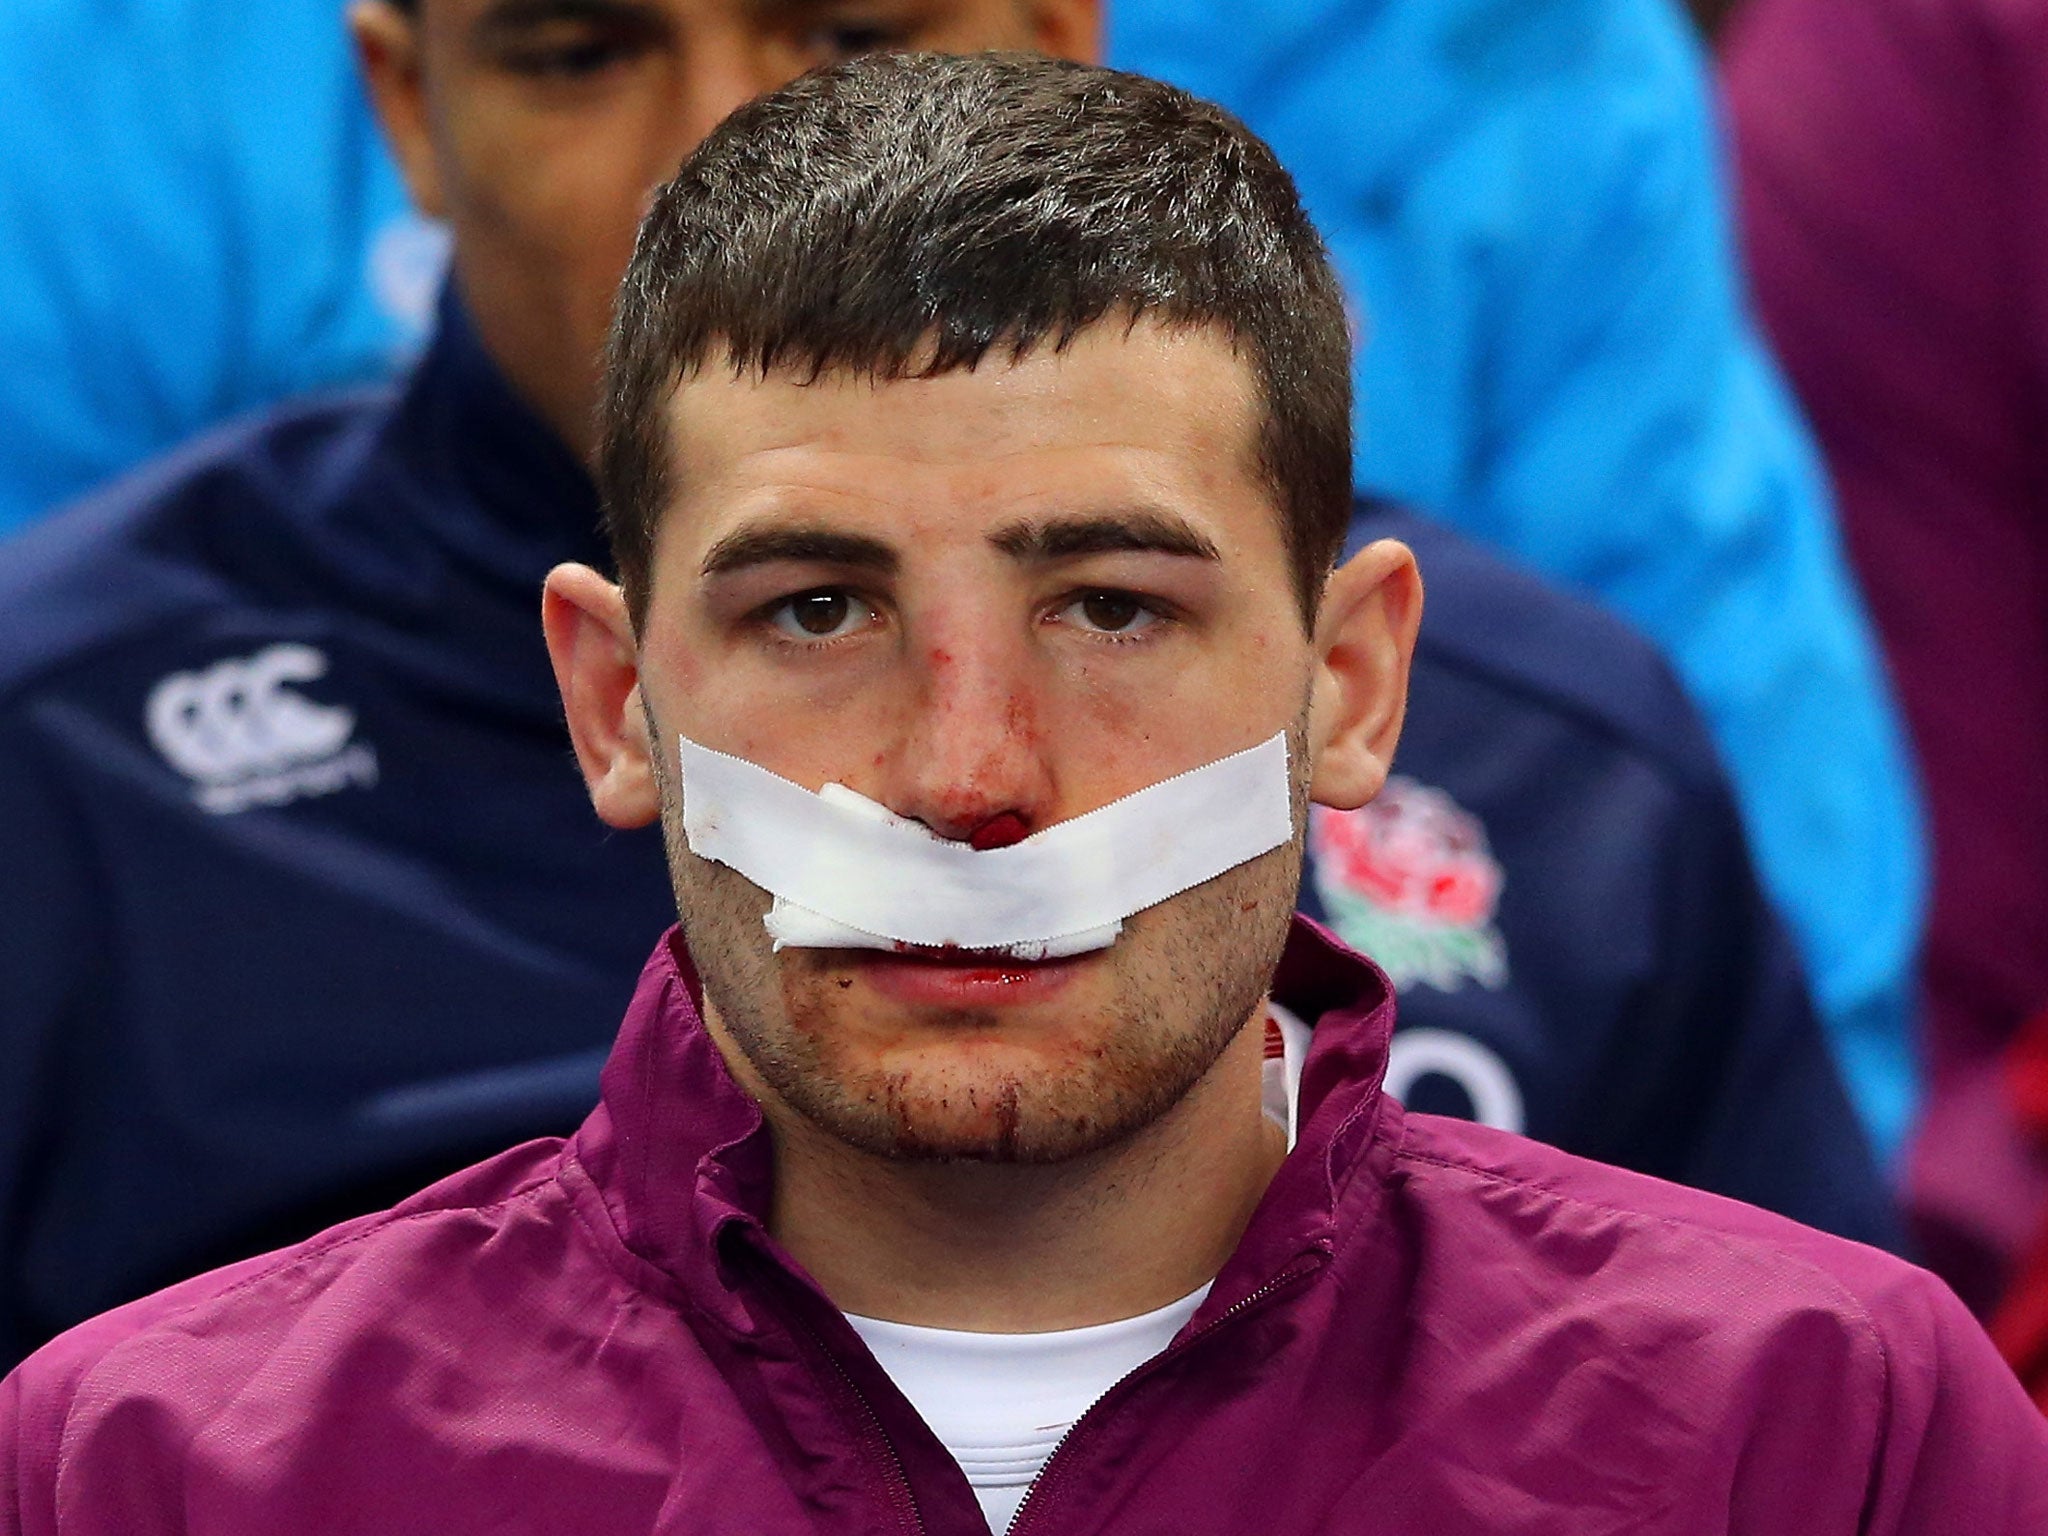 England wing Jonny May could miss the Calcutta Cup clash with Scotland due to a broken nose he suffered in the defeat to France